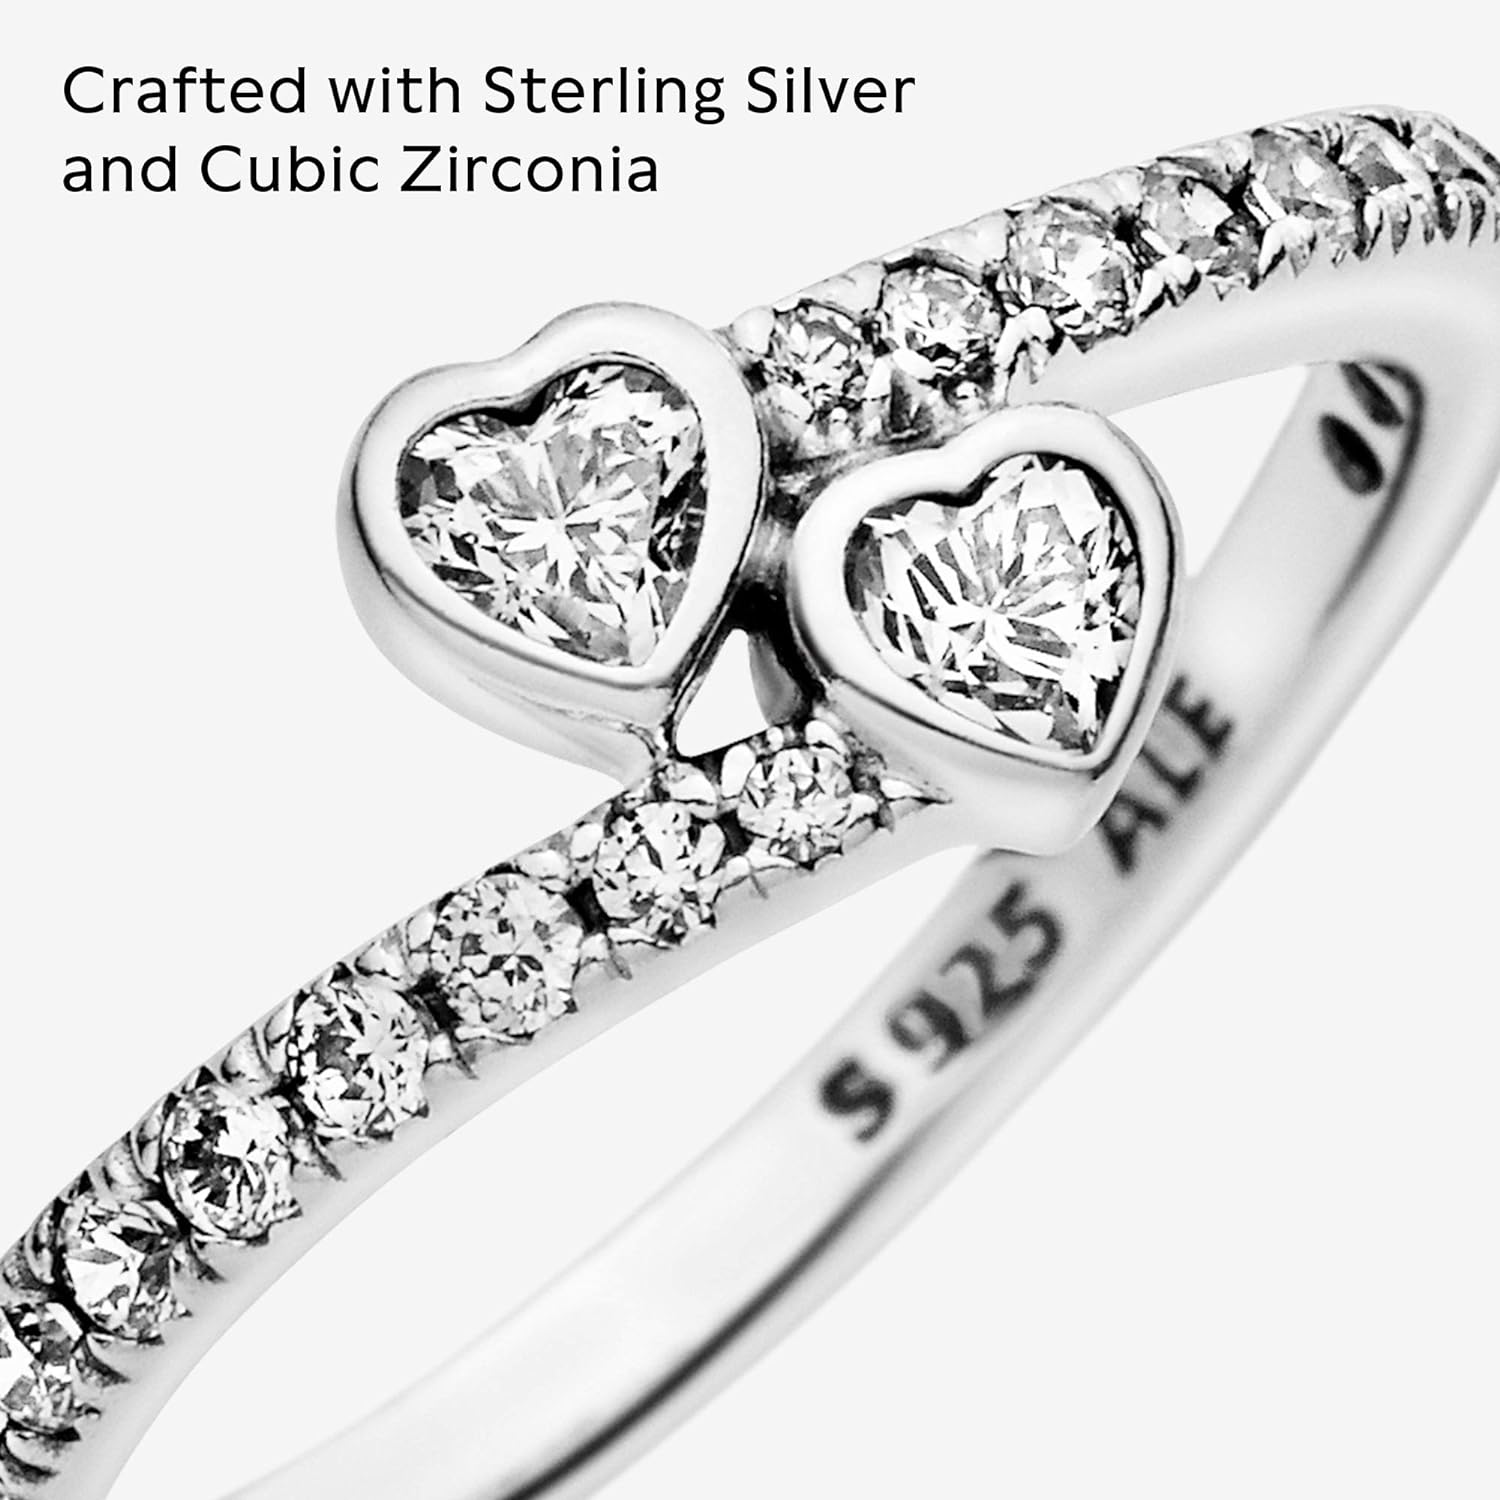 Pandora Two Sparkling Hearts Ring - The Ultimate Symbol of Love - Sterling Silver Ring for Women - Gift for Her - Sterling Silver with Clear Cubic Zirconia, With Gift Box